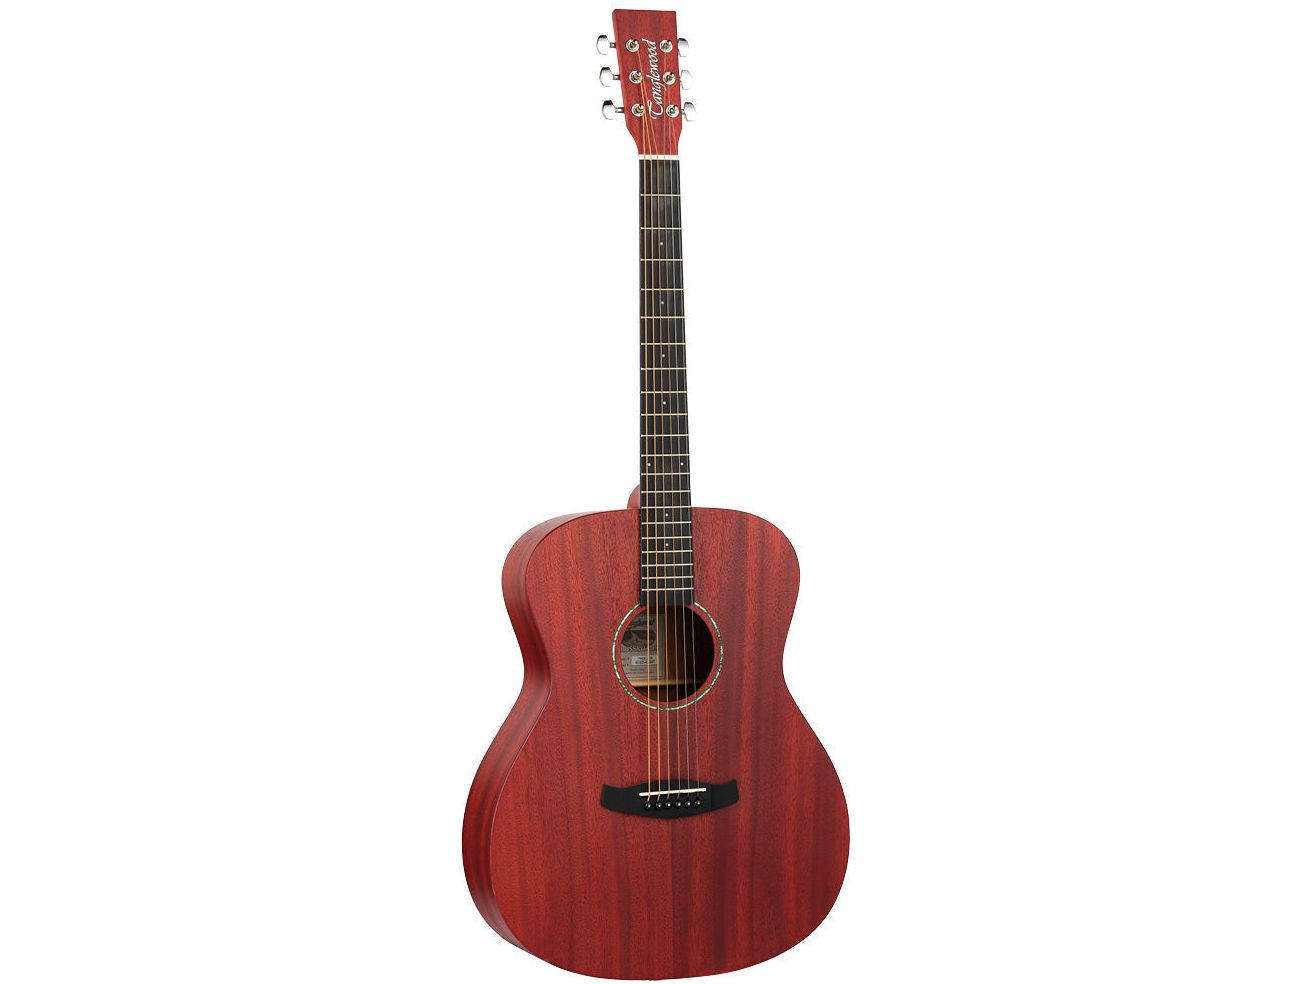 Tanglewood Crossroads TWCROTR 'Orchestra' Acoustic Guitar in Thru Red Stain Satin